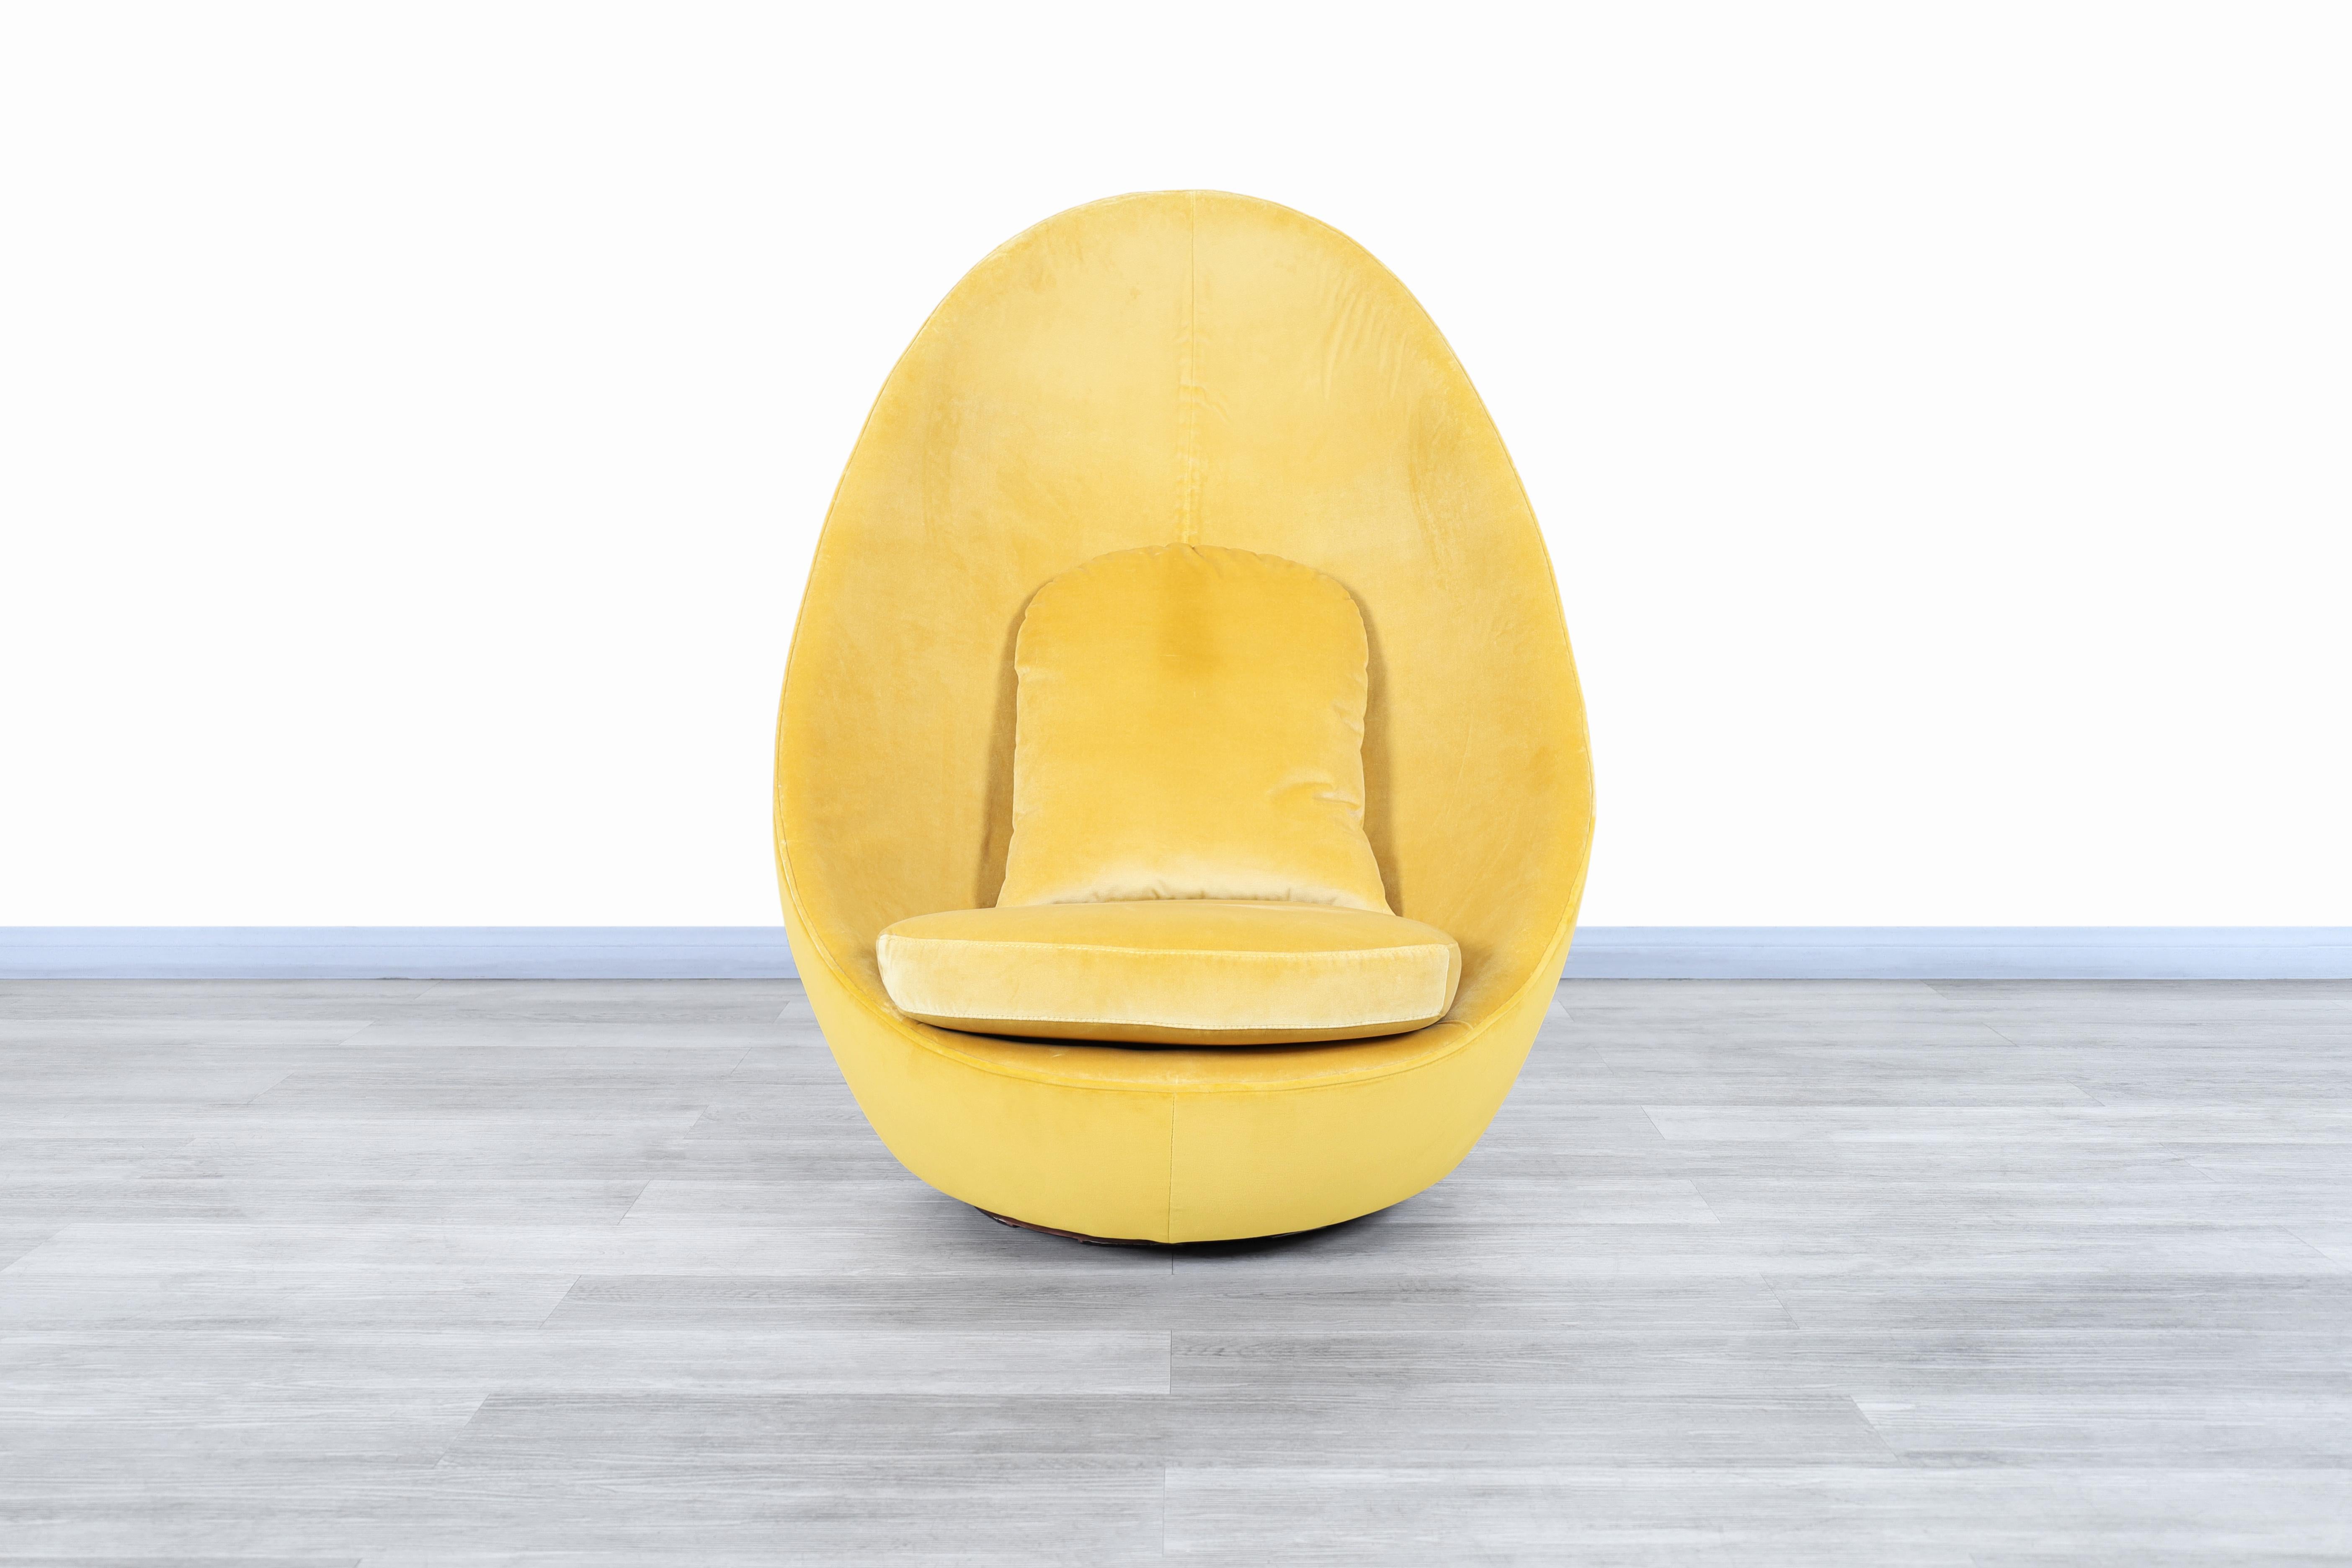 Amazing vintage “Egg” swivel lounge chair designed by Milo Baughman for Thayer Coggin in the United States, circa 1960s. This chair has an extremely detailed design, something that only Milo Baughman would have dared to manufacture, and that